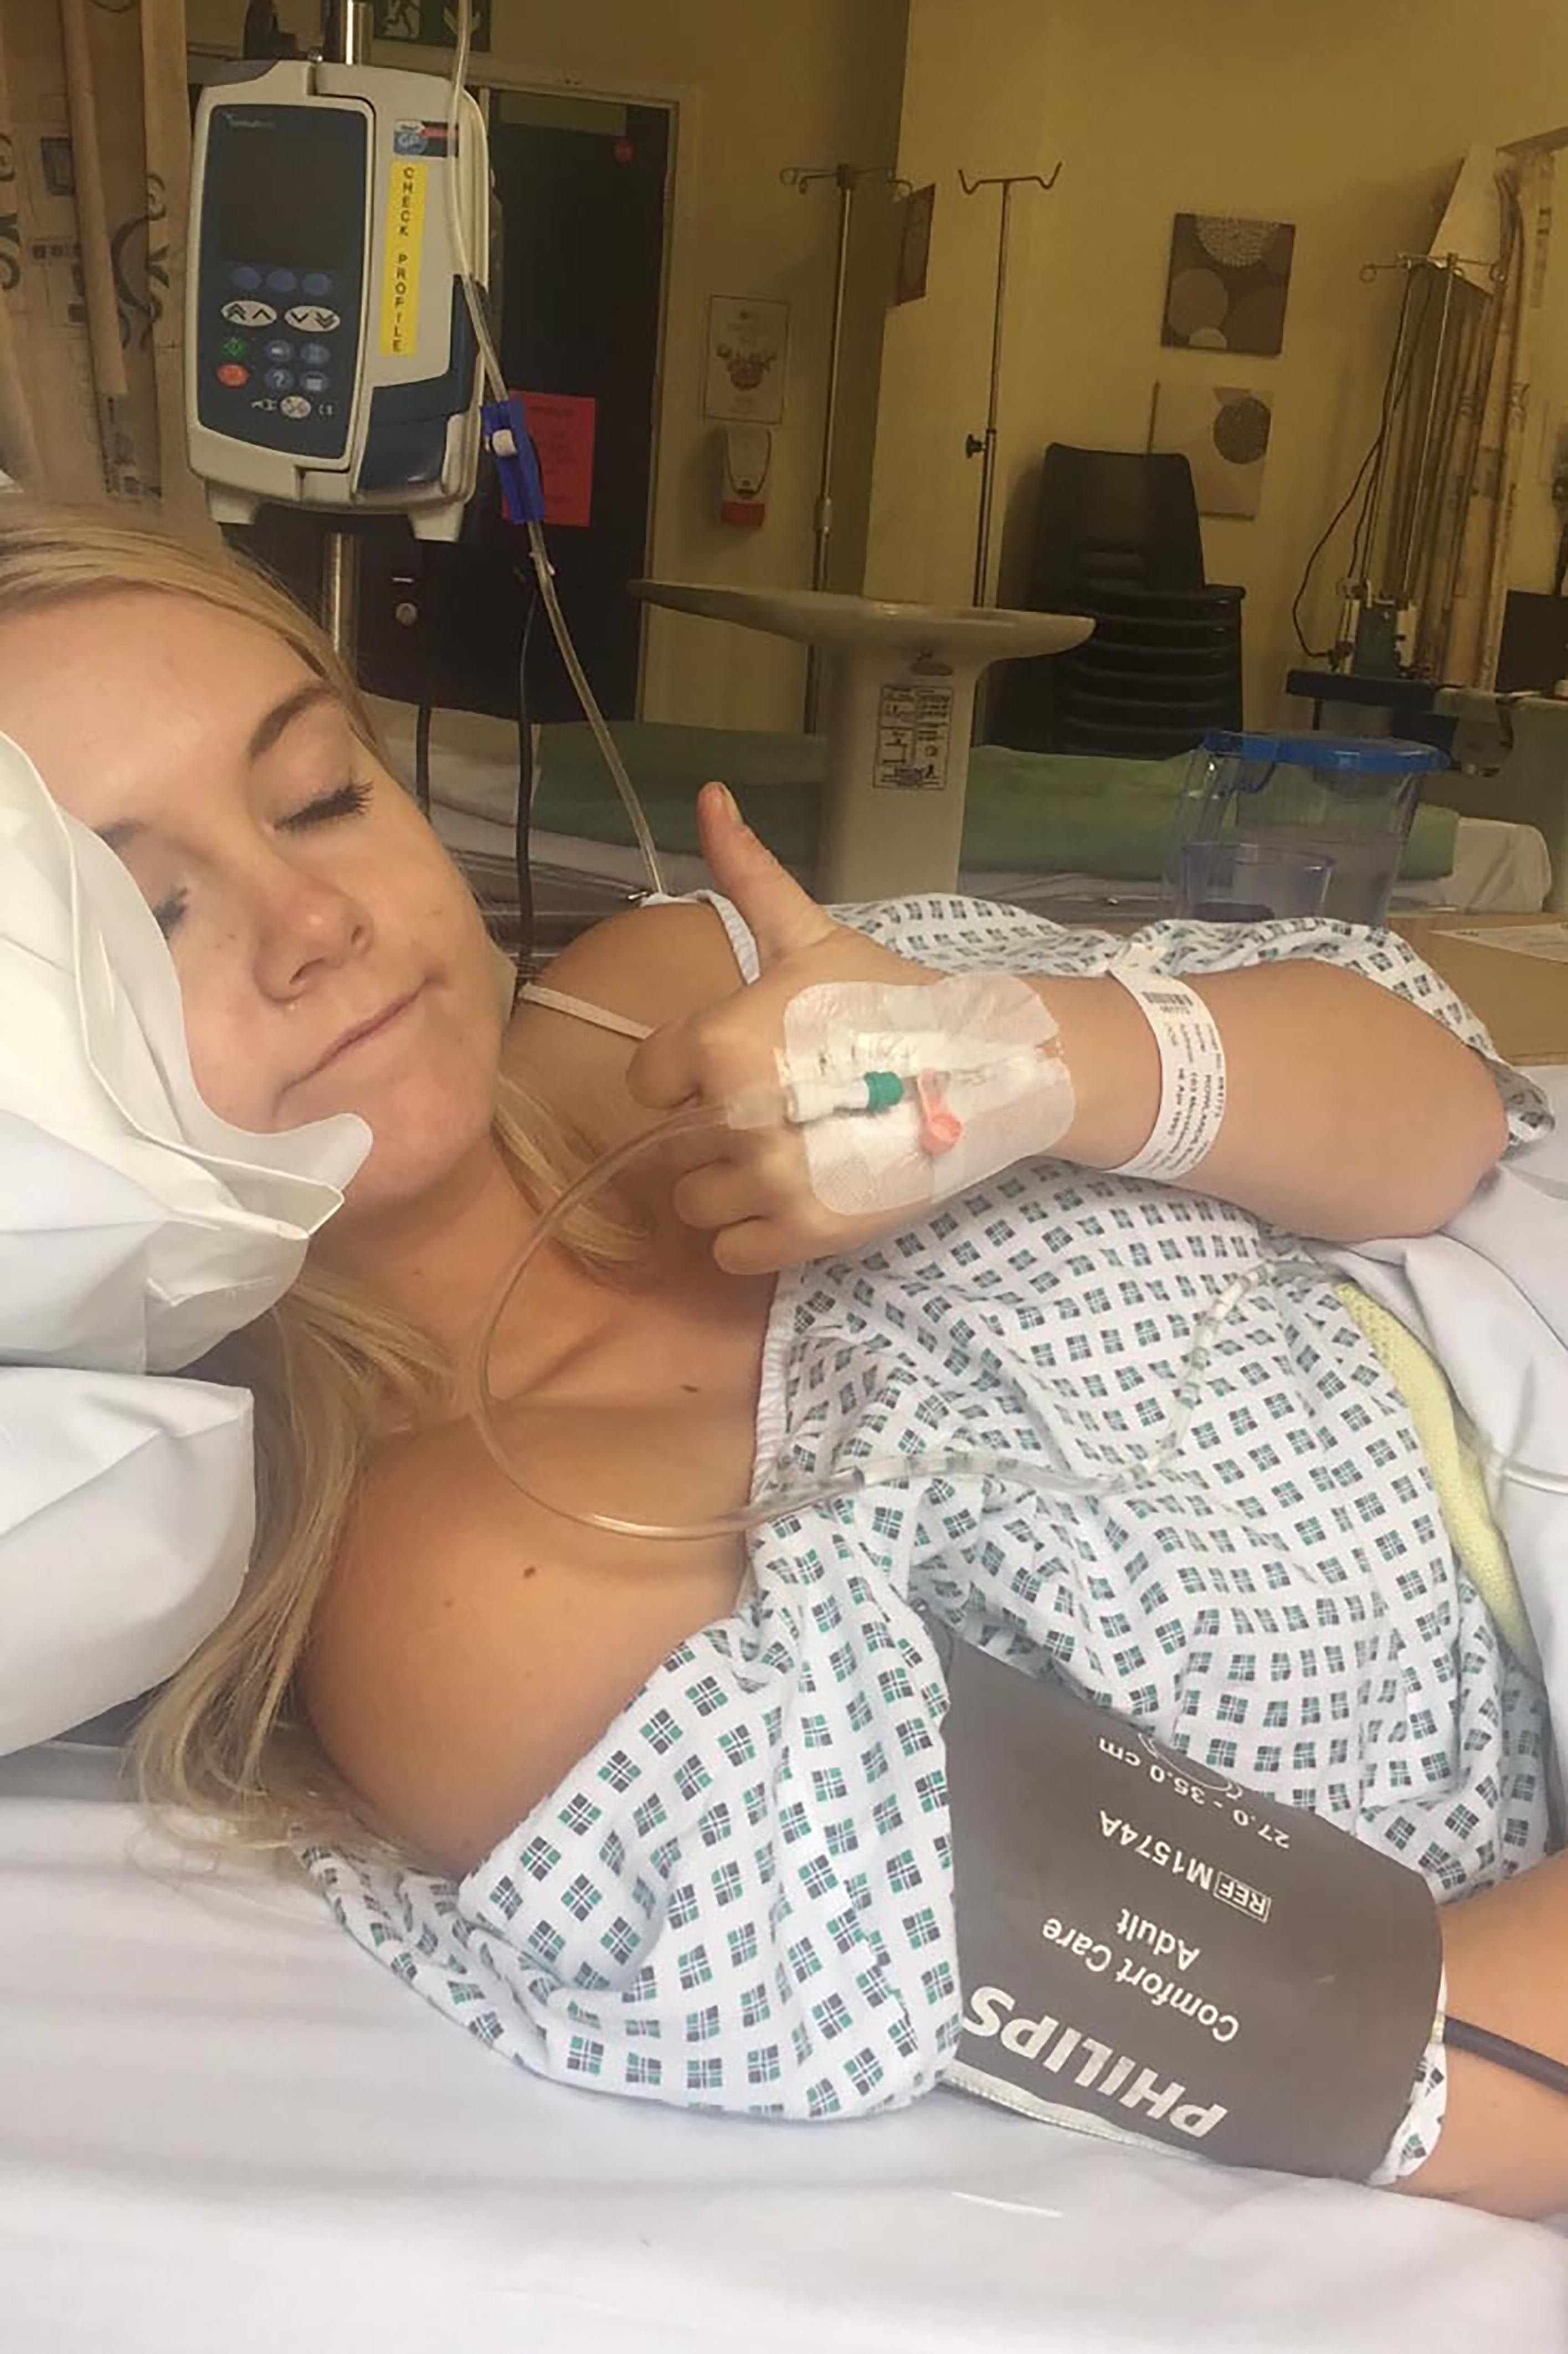 This Woman Got a Sex Toy Stuck In Her Butt Then Shared a Selfie From the  Hospital After Getting It Removed